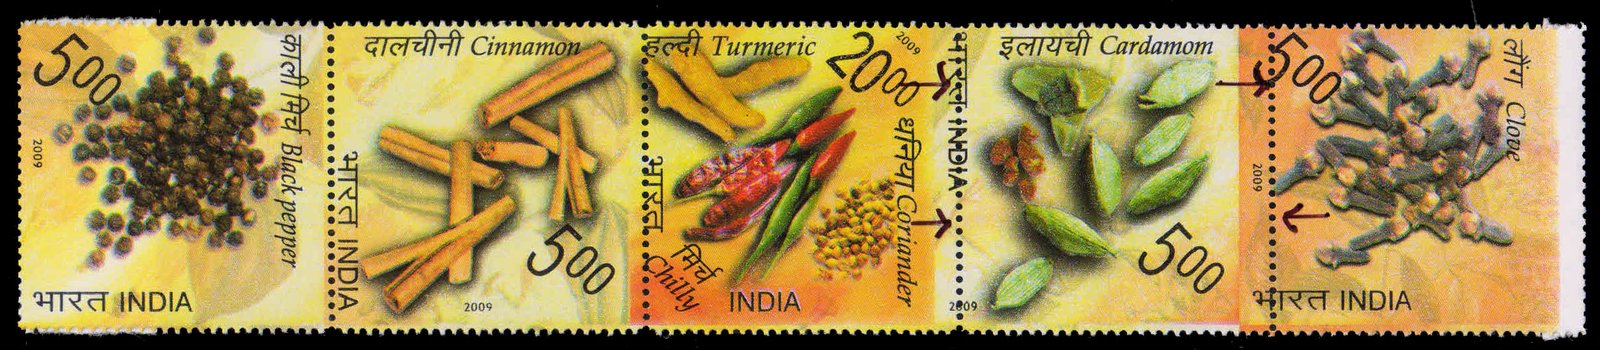 INDIA 2009-Spices of India, Perforation shift Error-Strip of 5, as per Scan